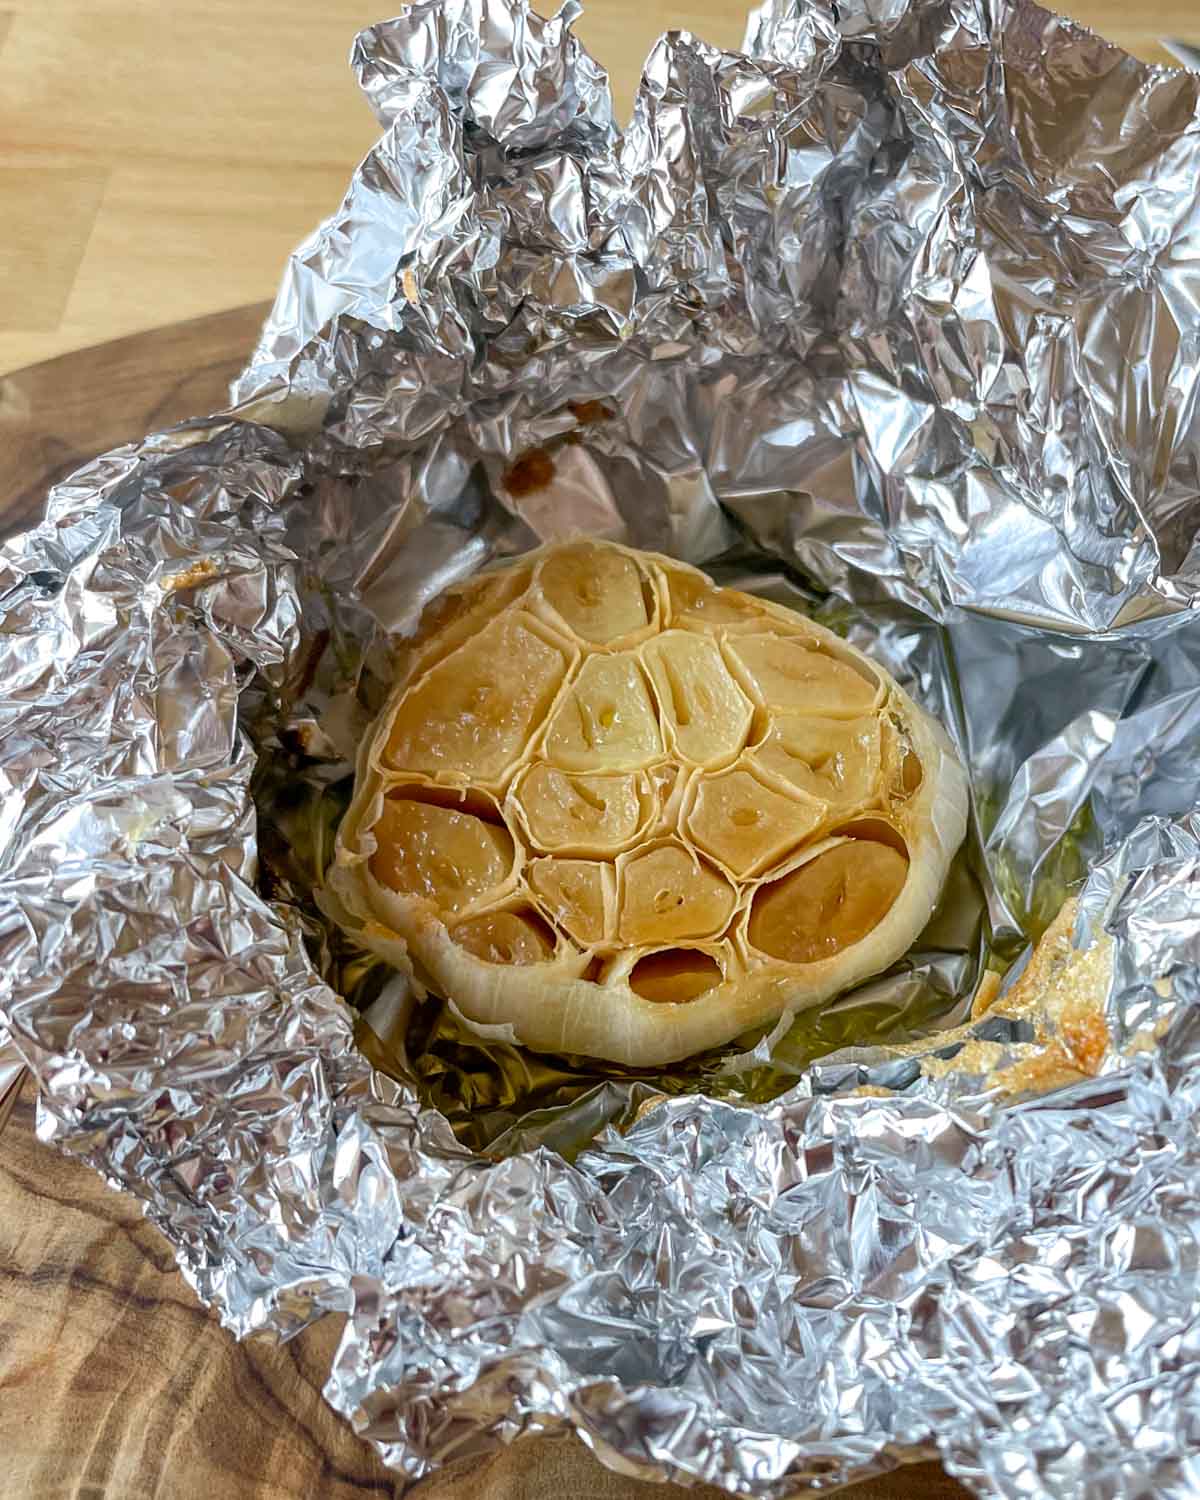 A head of roasted garlic sits in tin foil on a wooden cutting board.